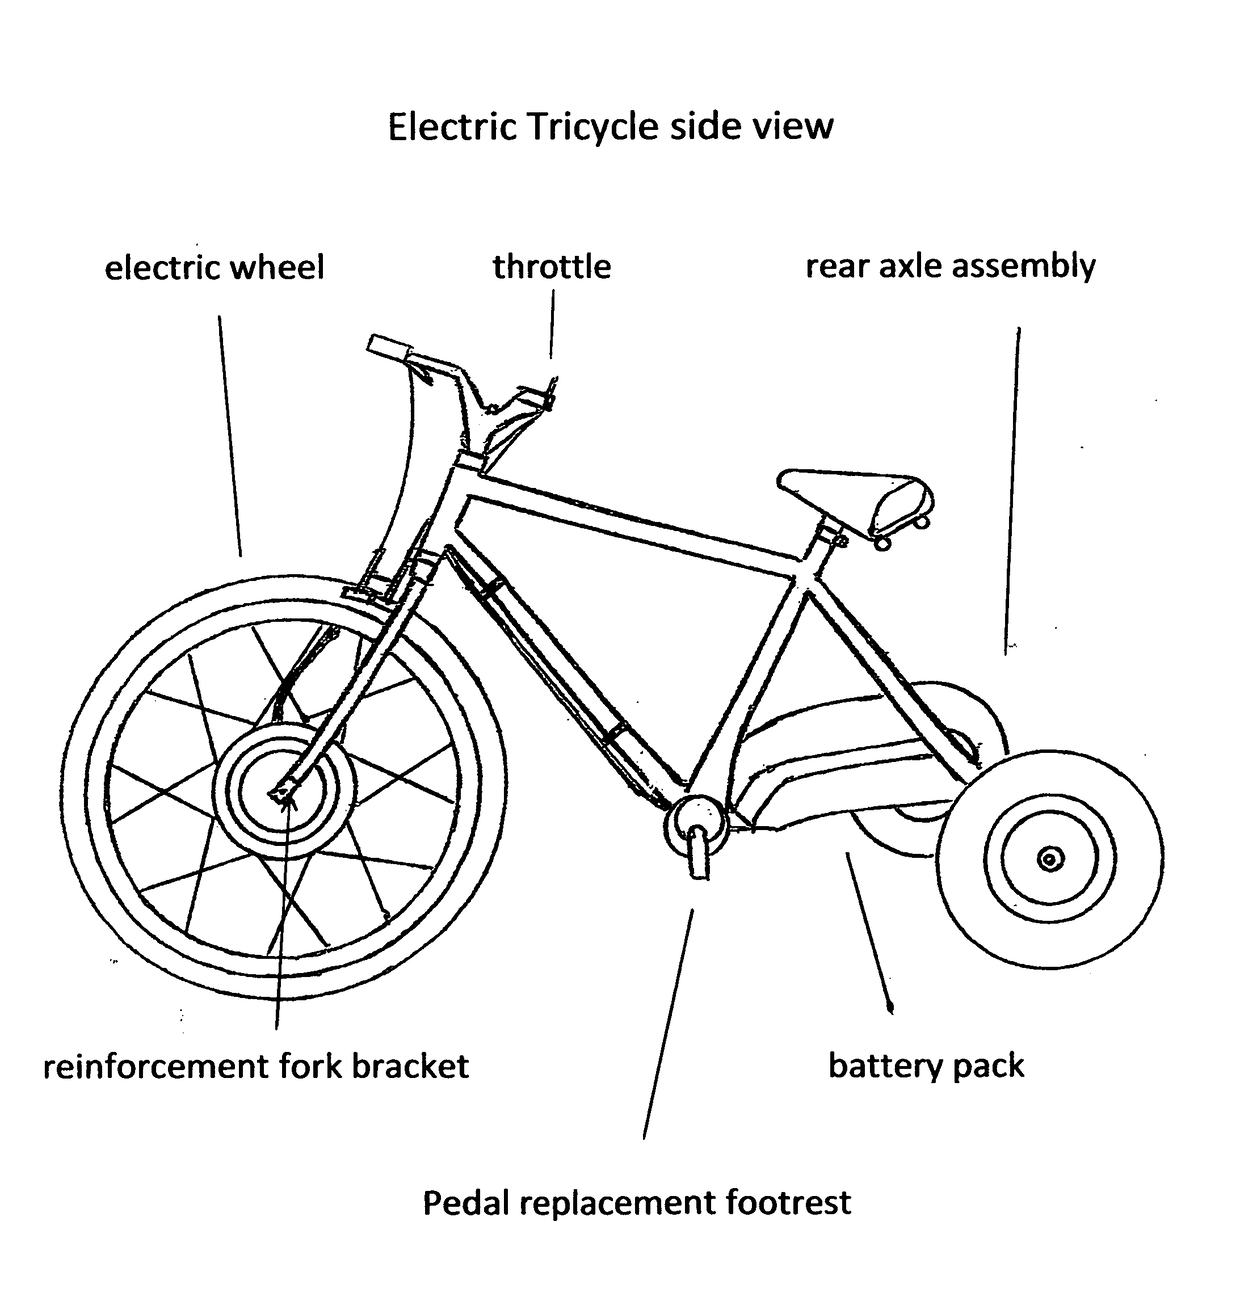 Electric Tricycle Conversion Kit